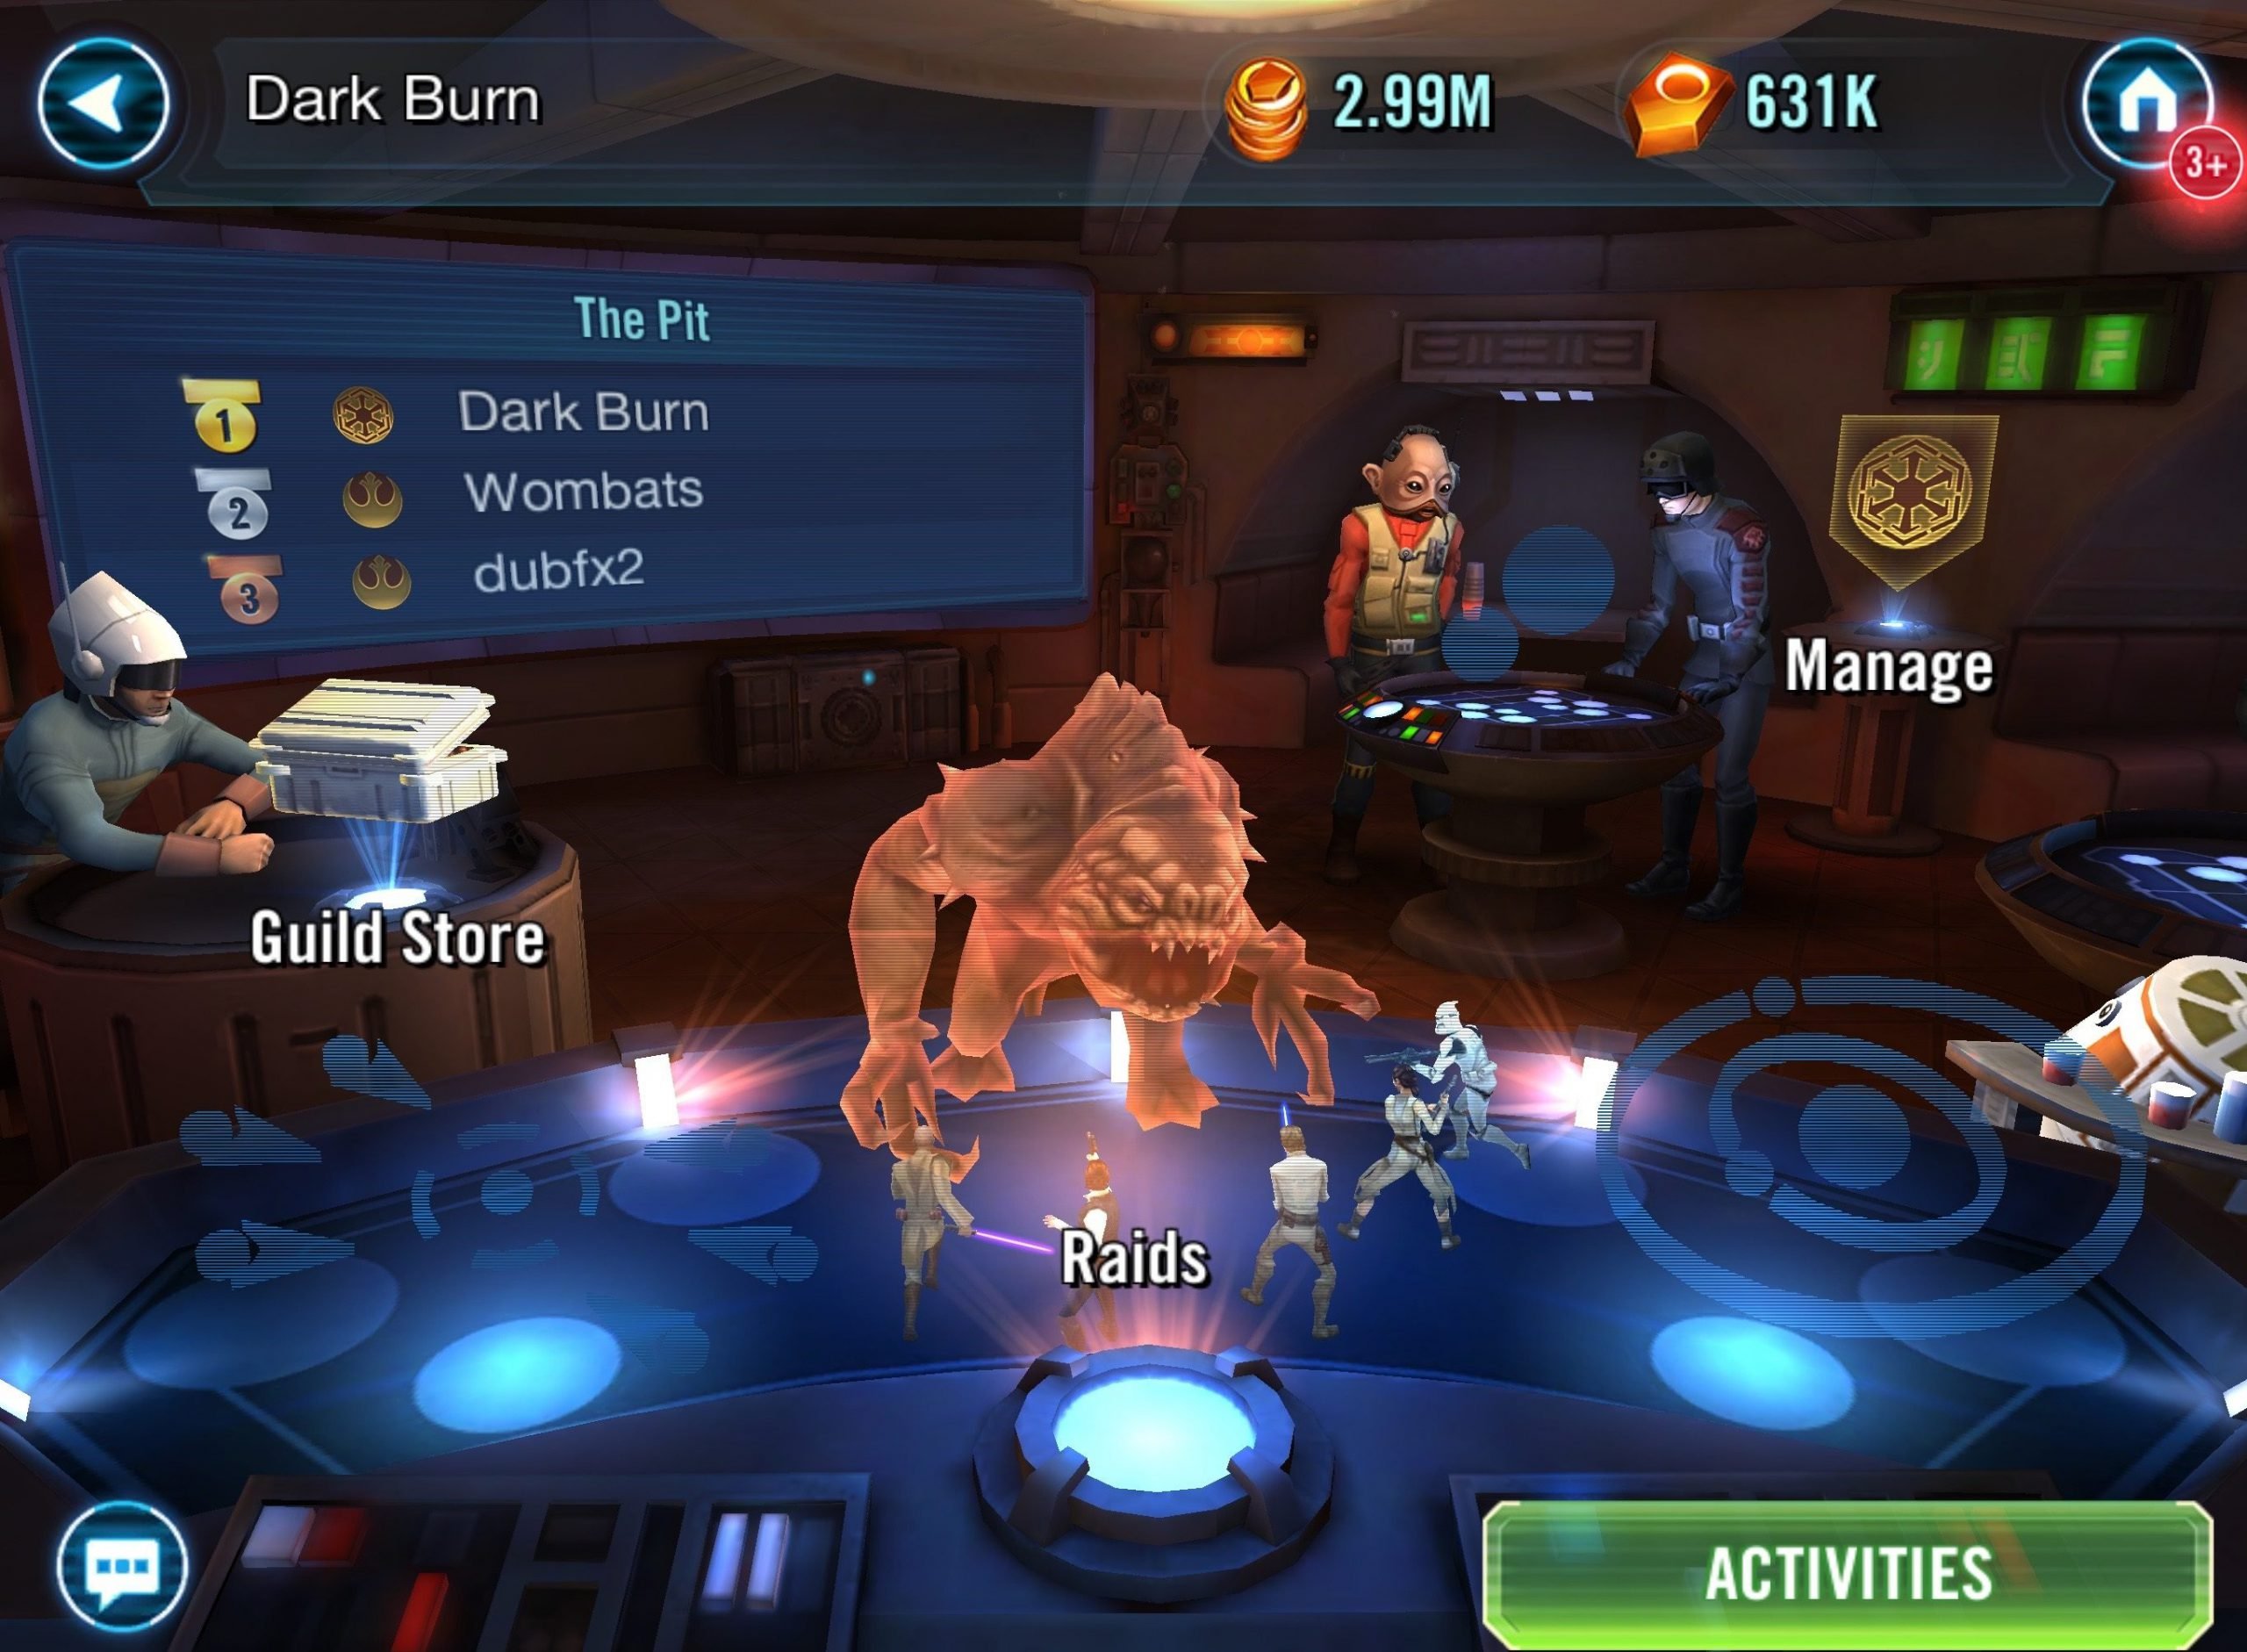 Star Wars: Galaxy of Heroes Gets Guilds, Raids in New Update